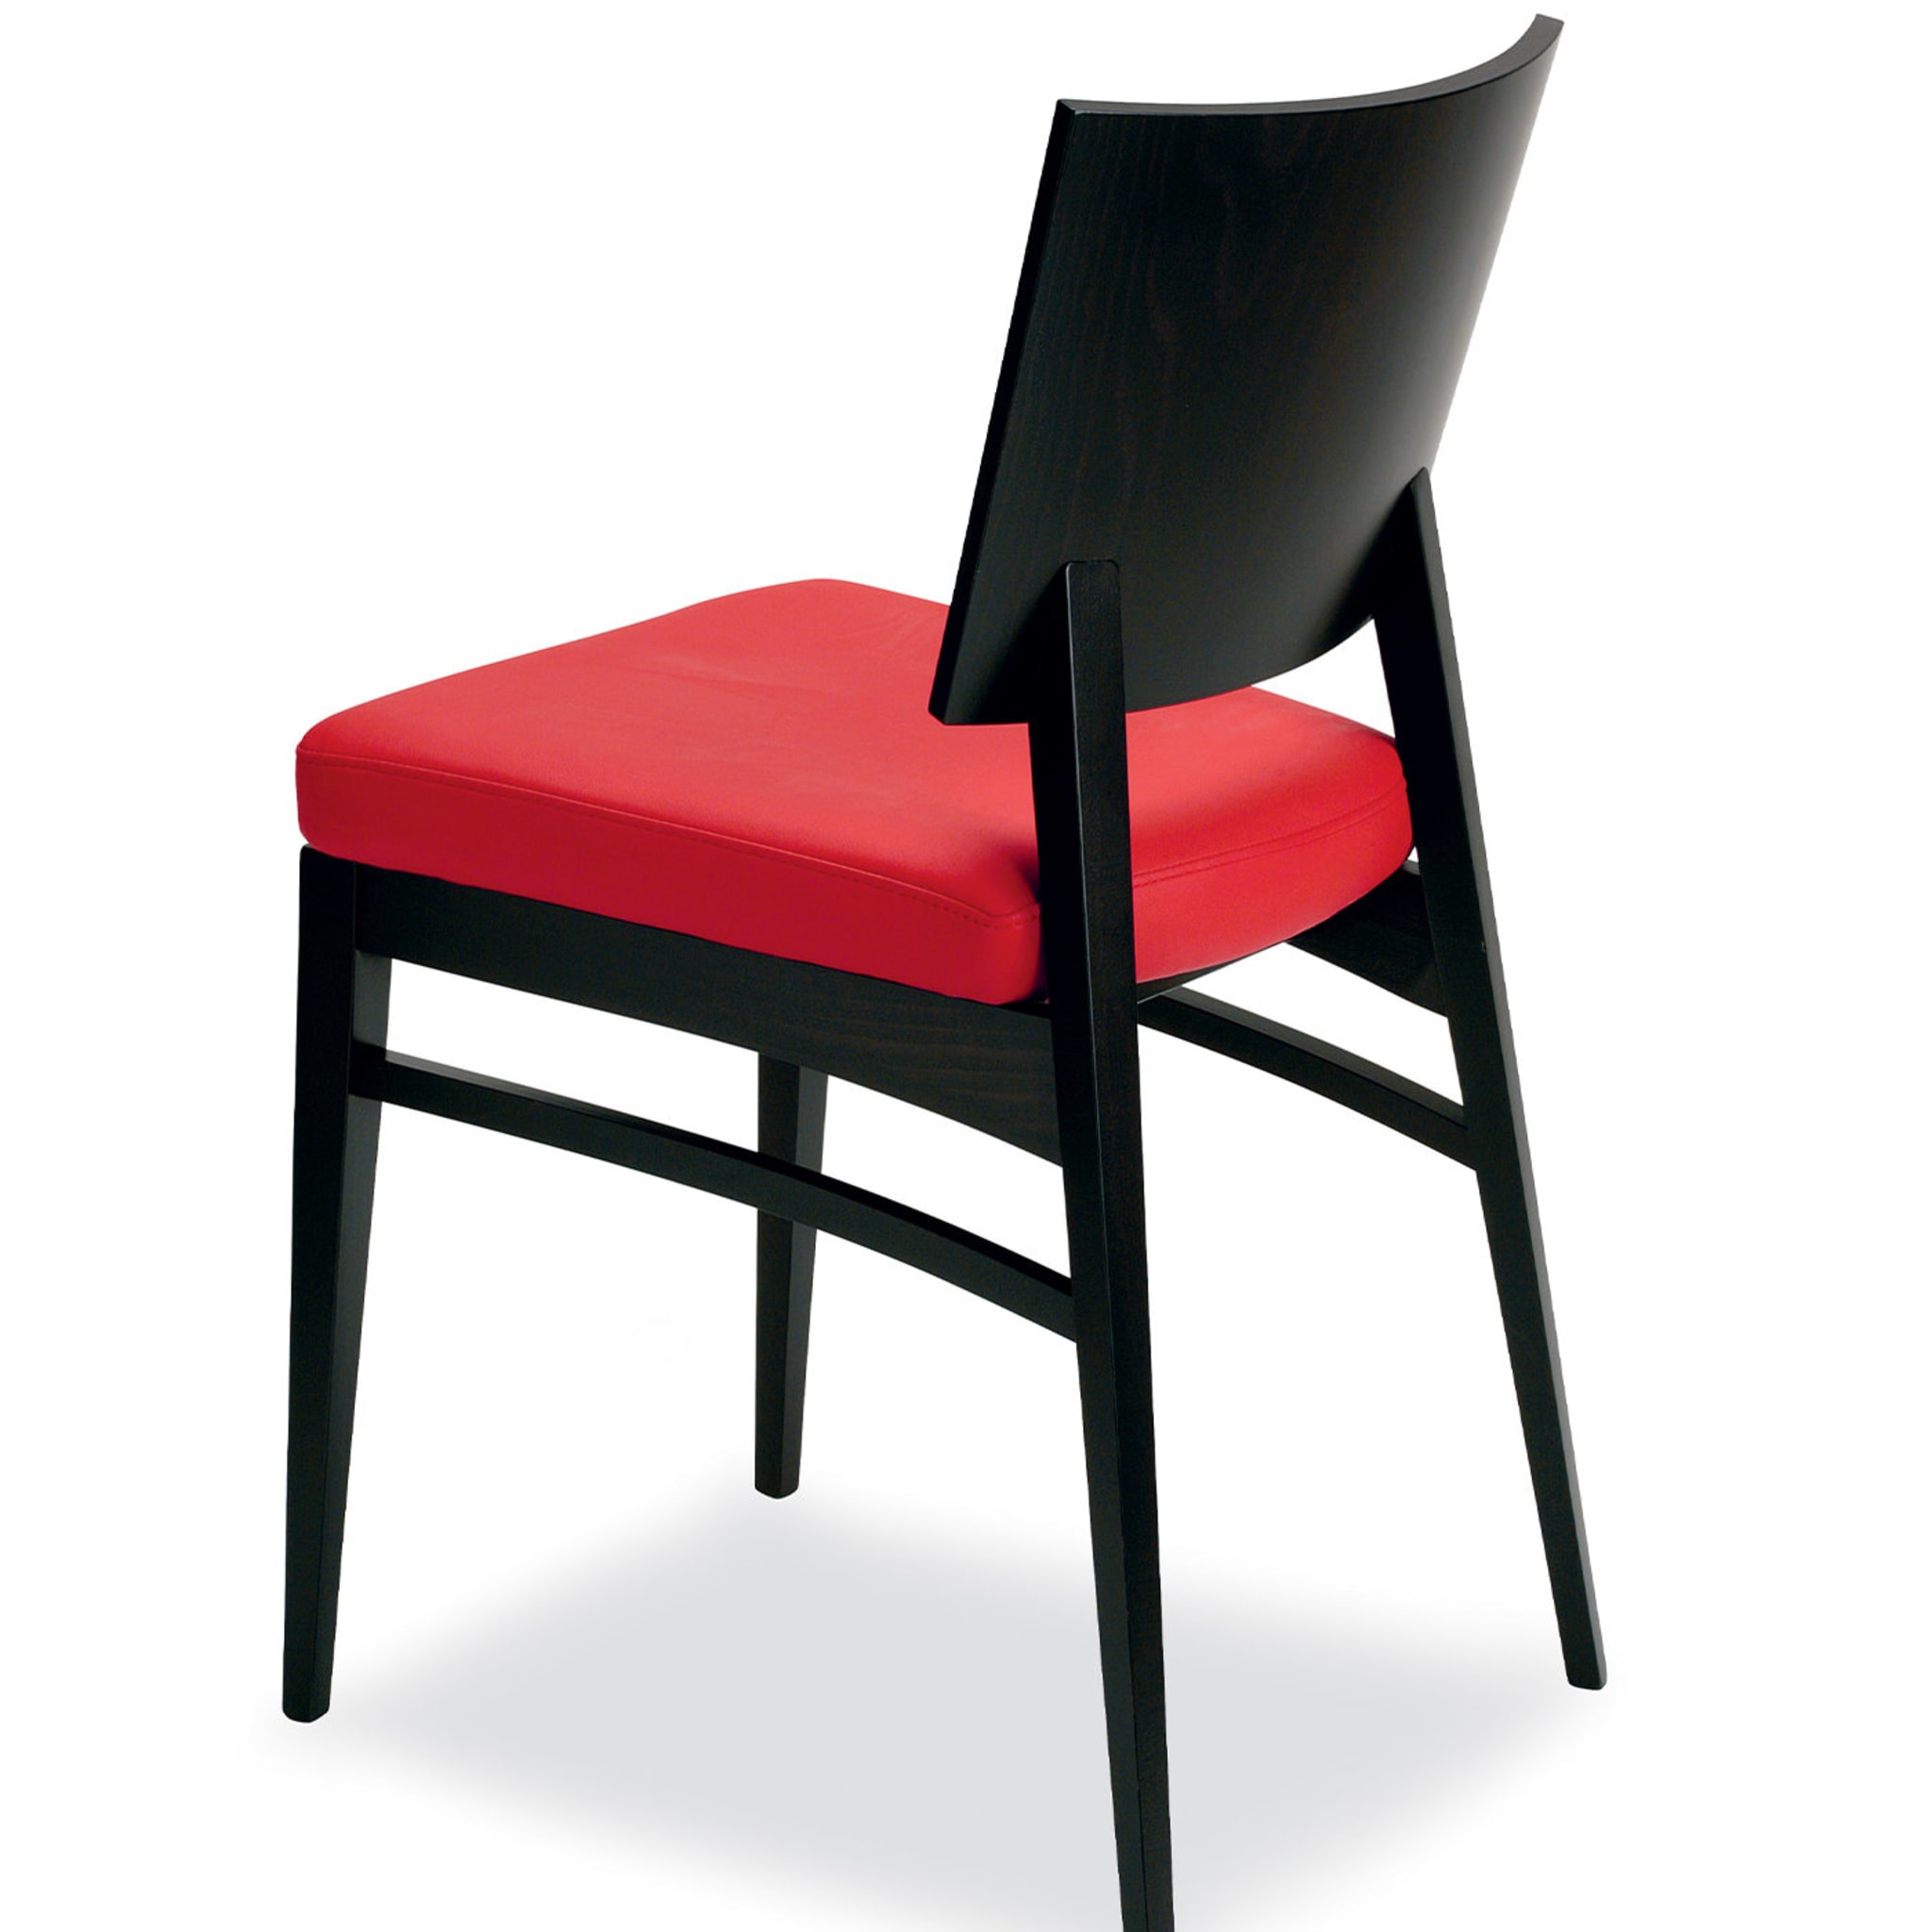 Crono Set of 2 Red and Black Chairs - Alternative view 1